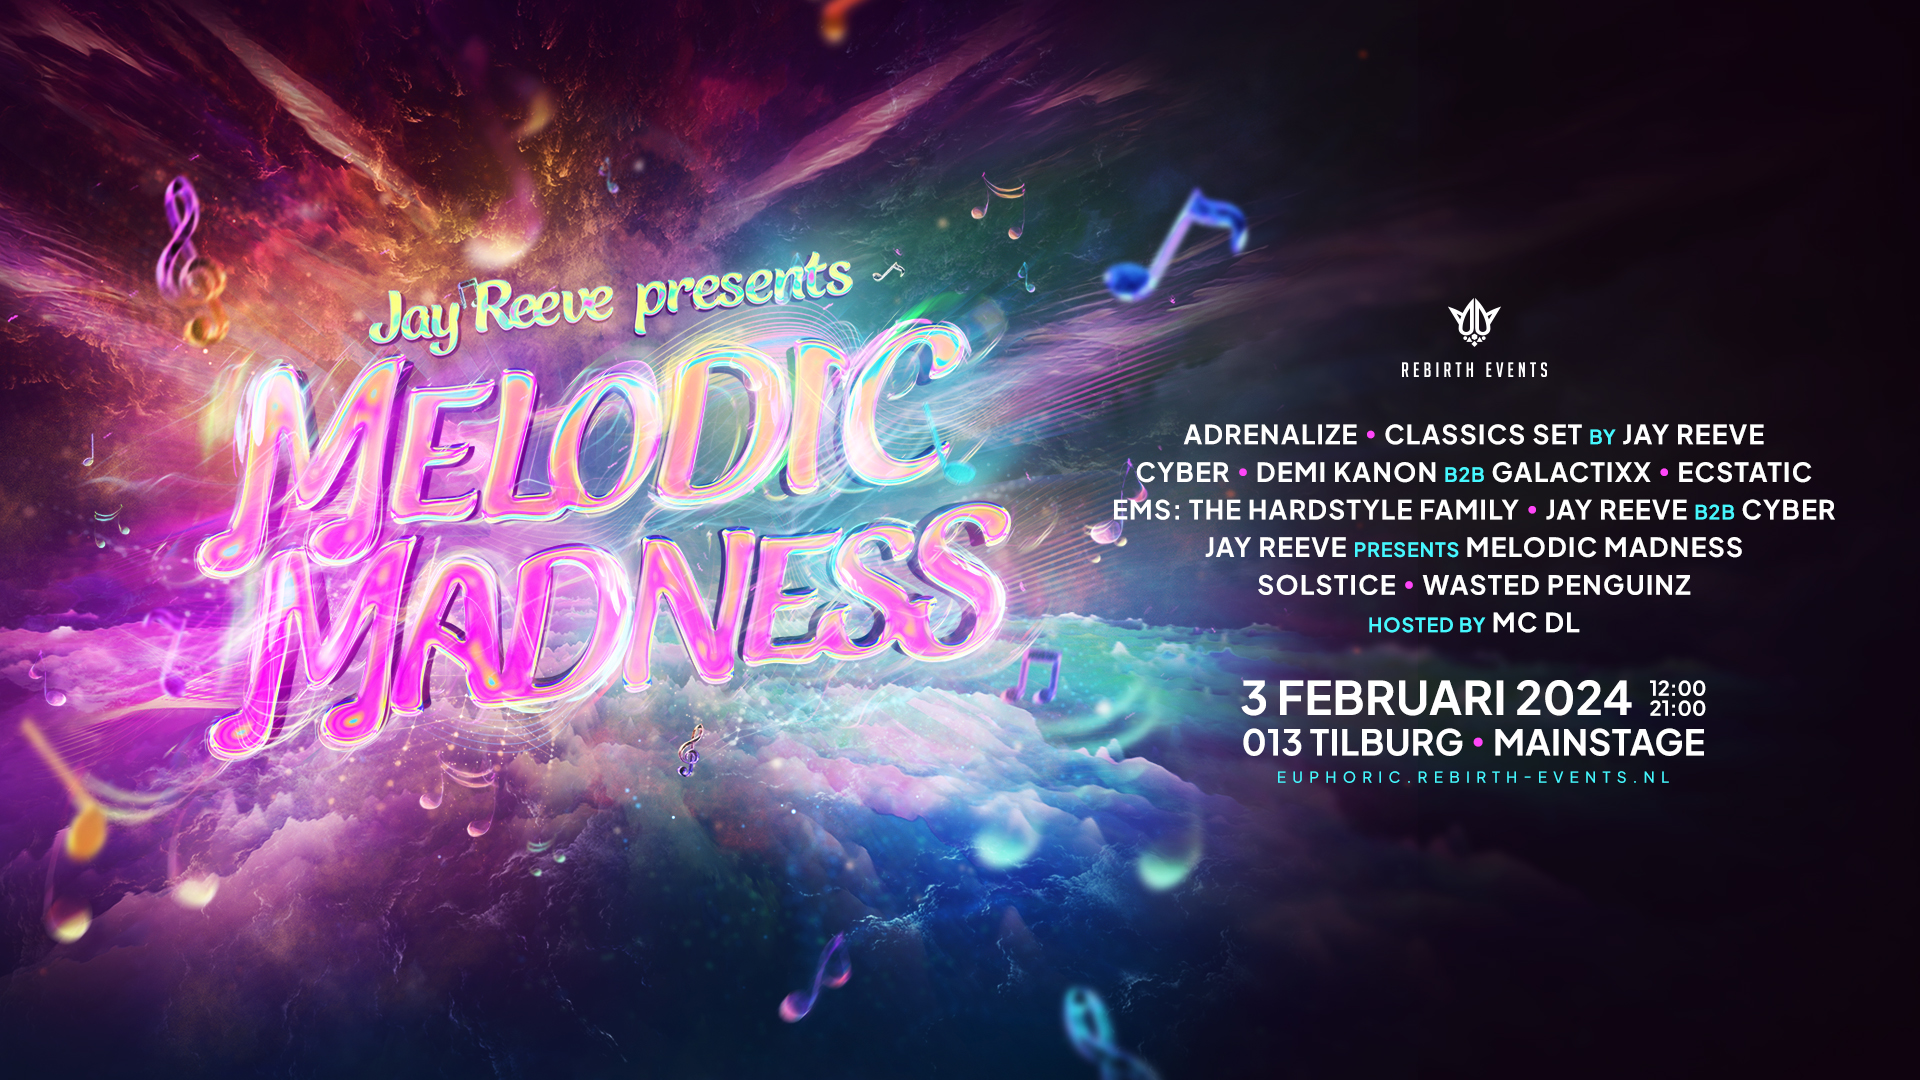 Jay Reeve presents Melodic Madness